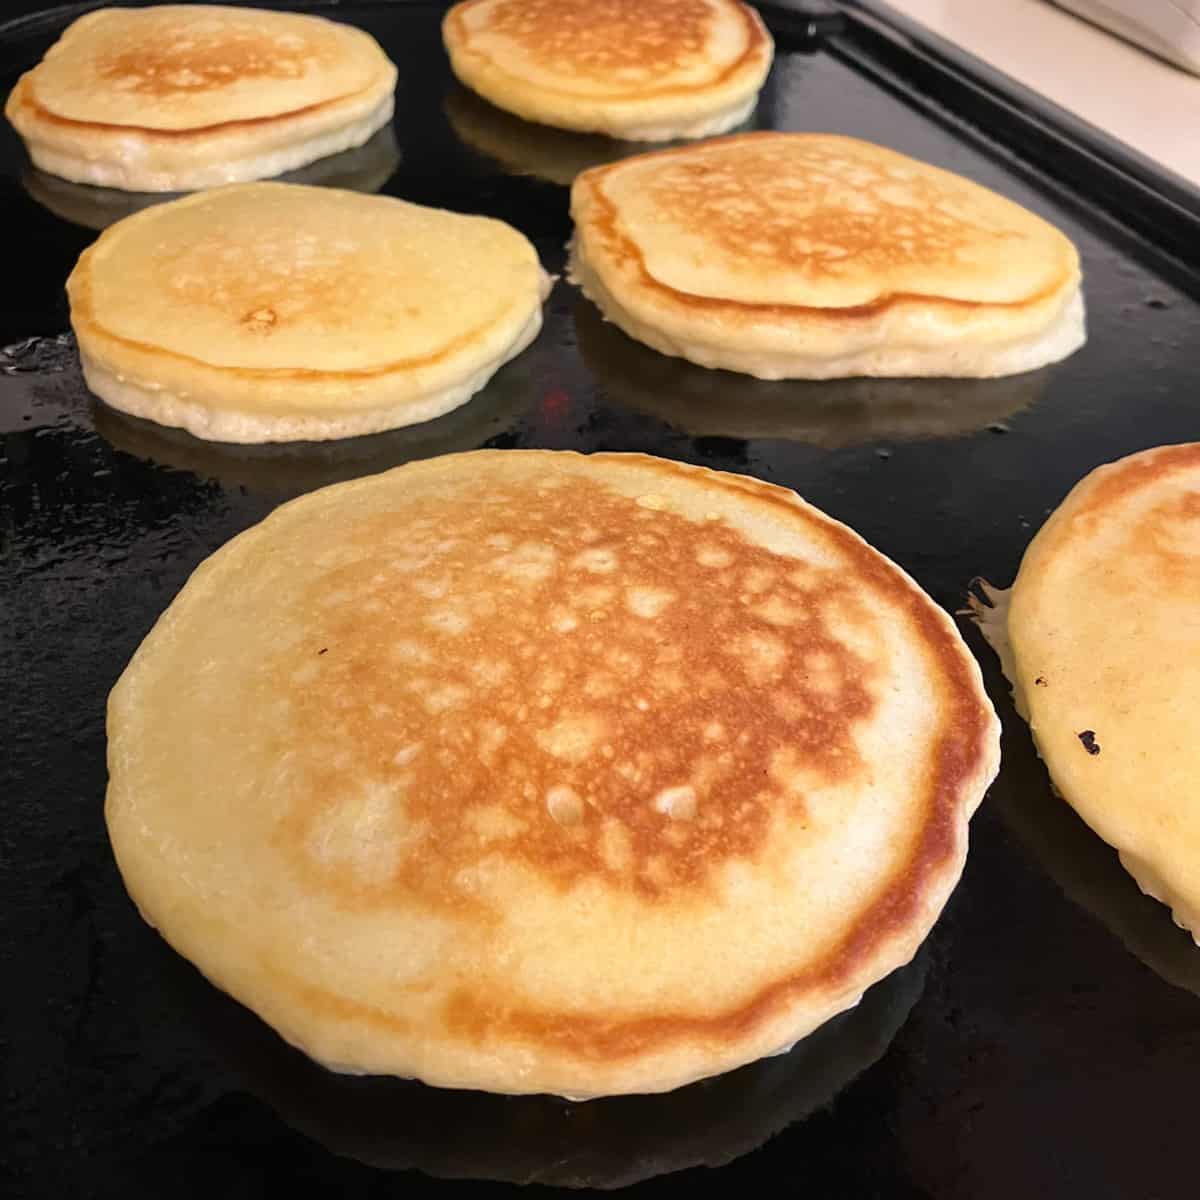 Are these pancakes done, or do they need more time on the grill? #Breakfast